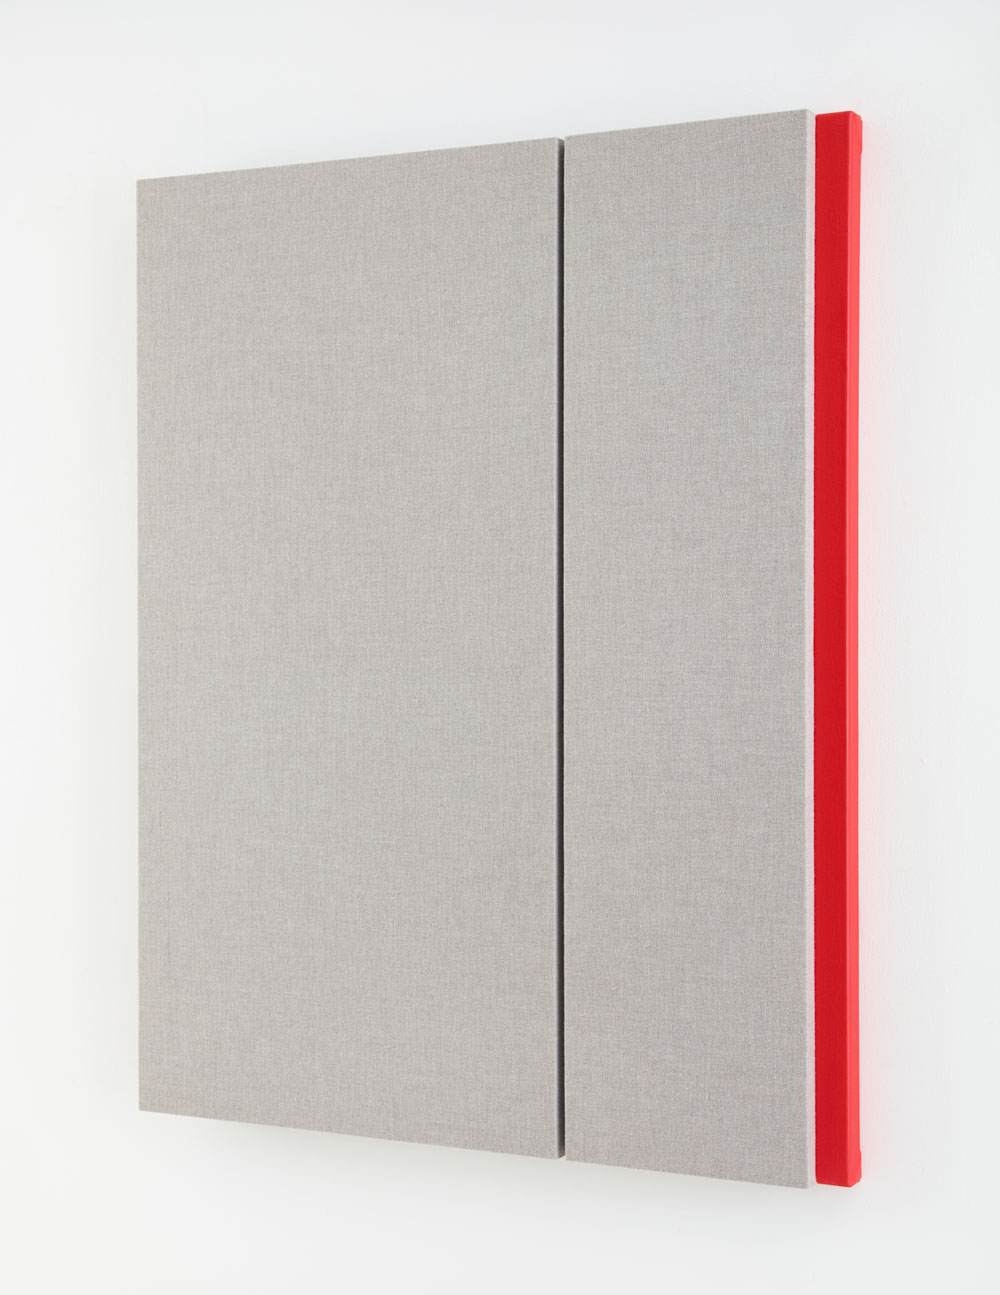  Quiet Gray with Red Reverberation #2, Acoustic absorber panel and acrylic paint on canvas 48 x 38 inches, 2014 